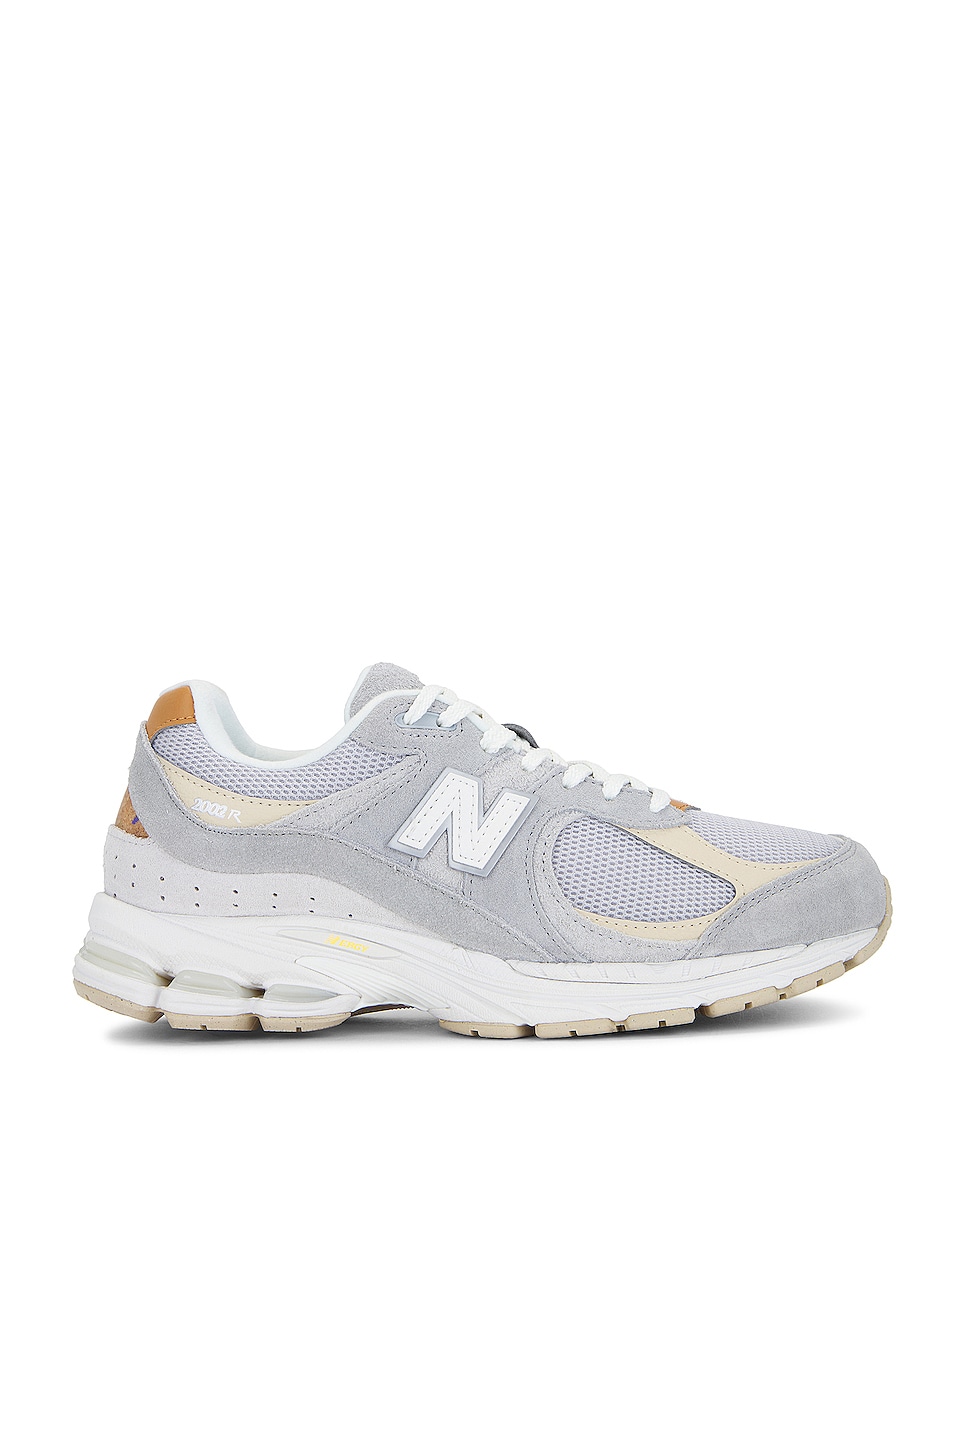 Image 1 of New Balance 2002r in Concrete, Sandstone & Grey Matter